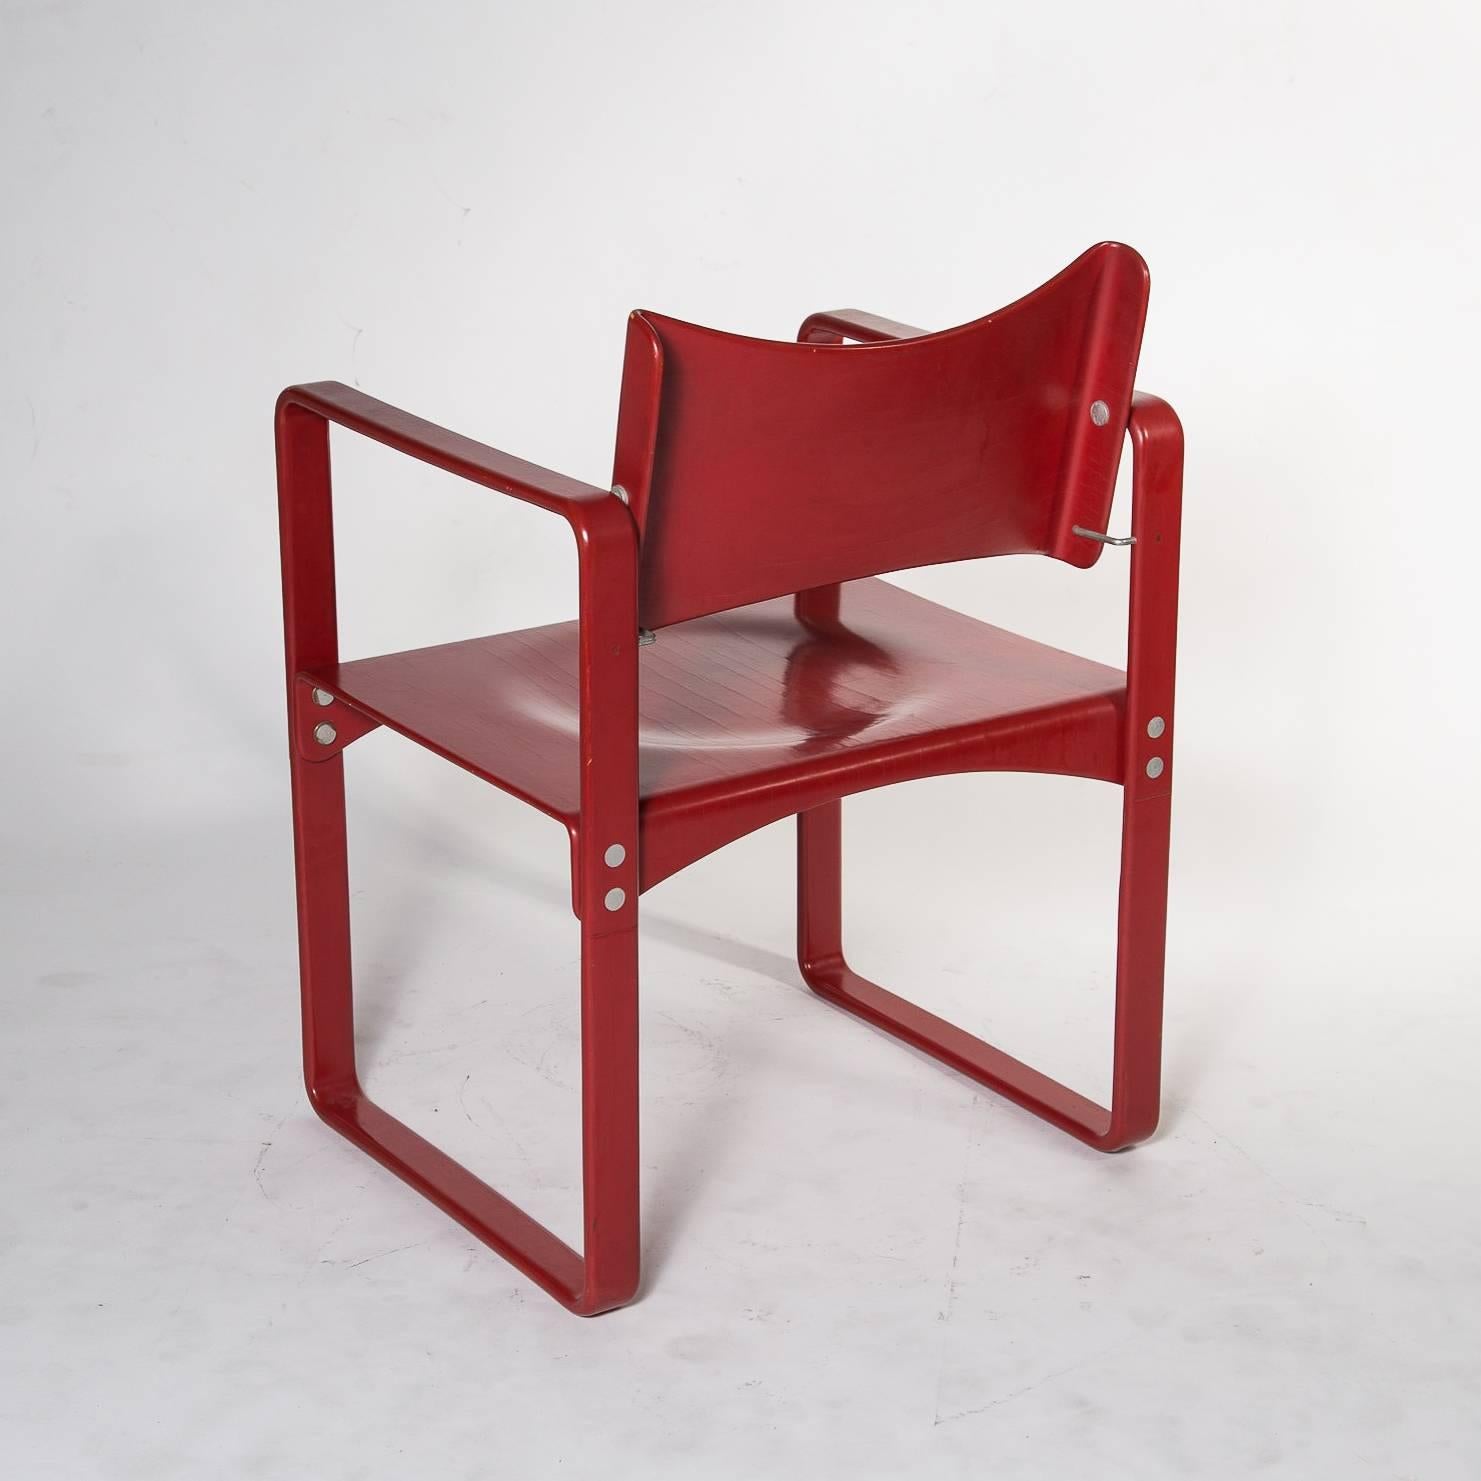 Painted Red Verner Panton No. 271 Dining Chair for Thonet, Germany, circa 1970 For Sale